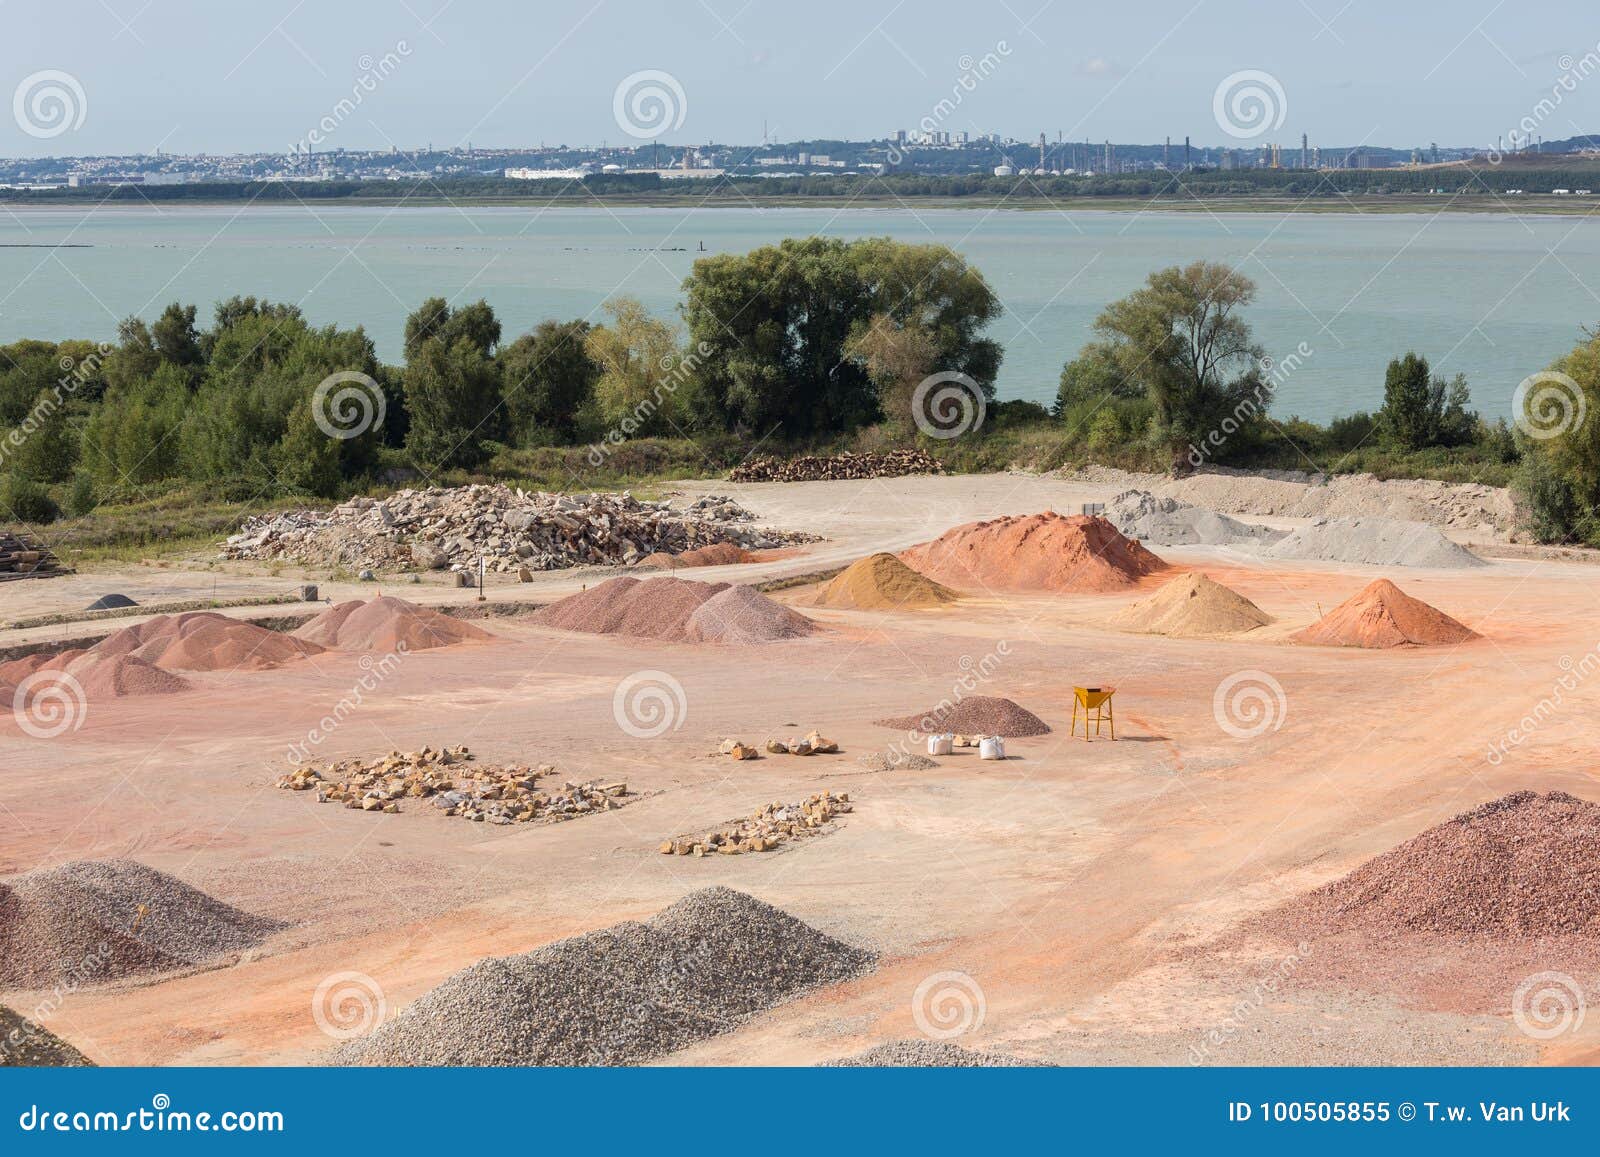 stockyard of sands, pebbles and aggregates near le havre, france